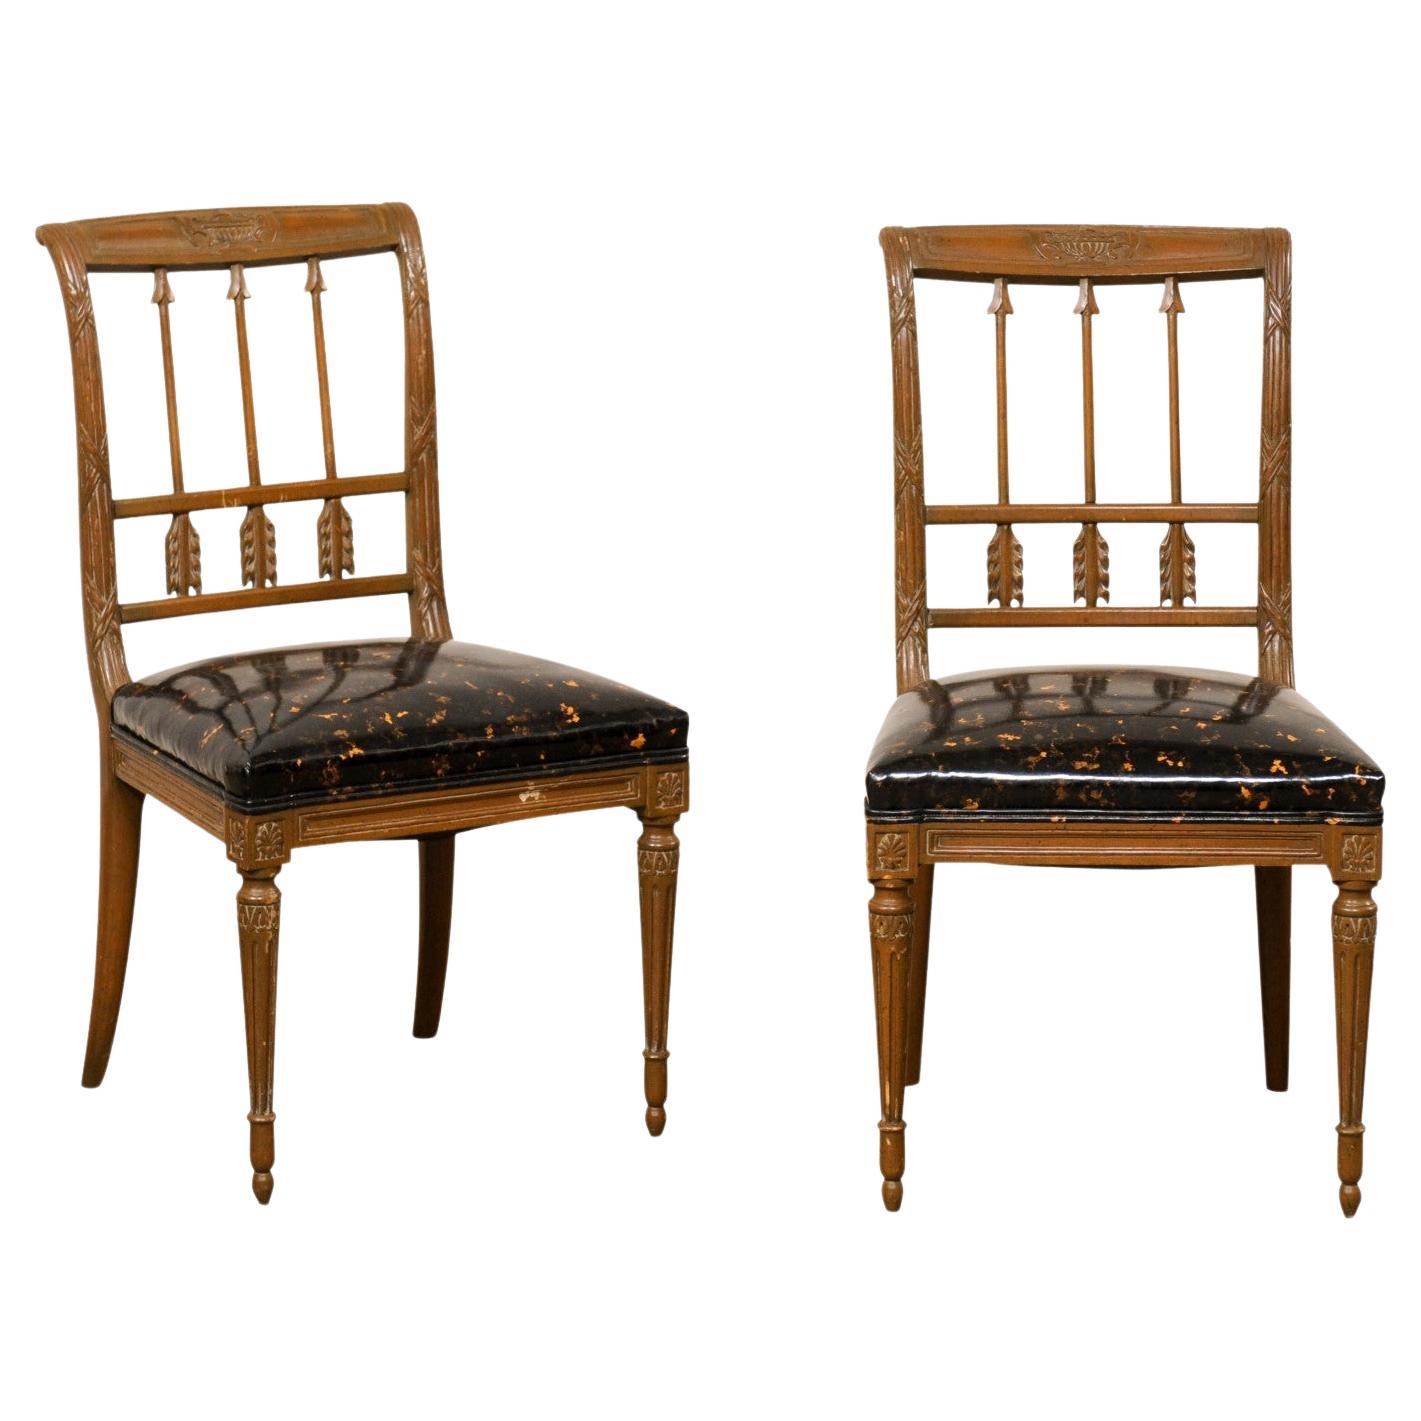 French Pair of Neoclassic Style Arrow Splat Side Chairs w/Upholstered Seats